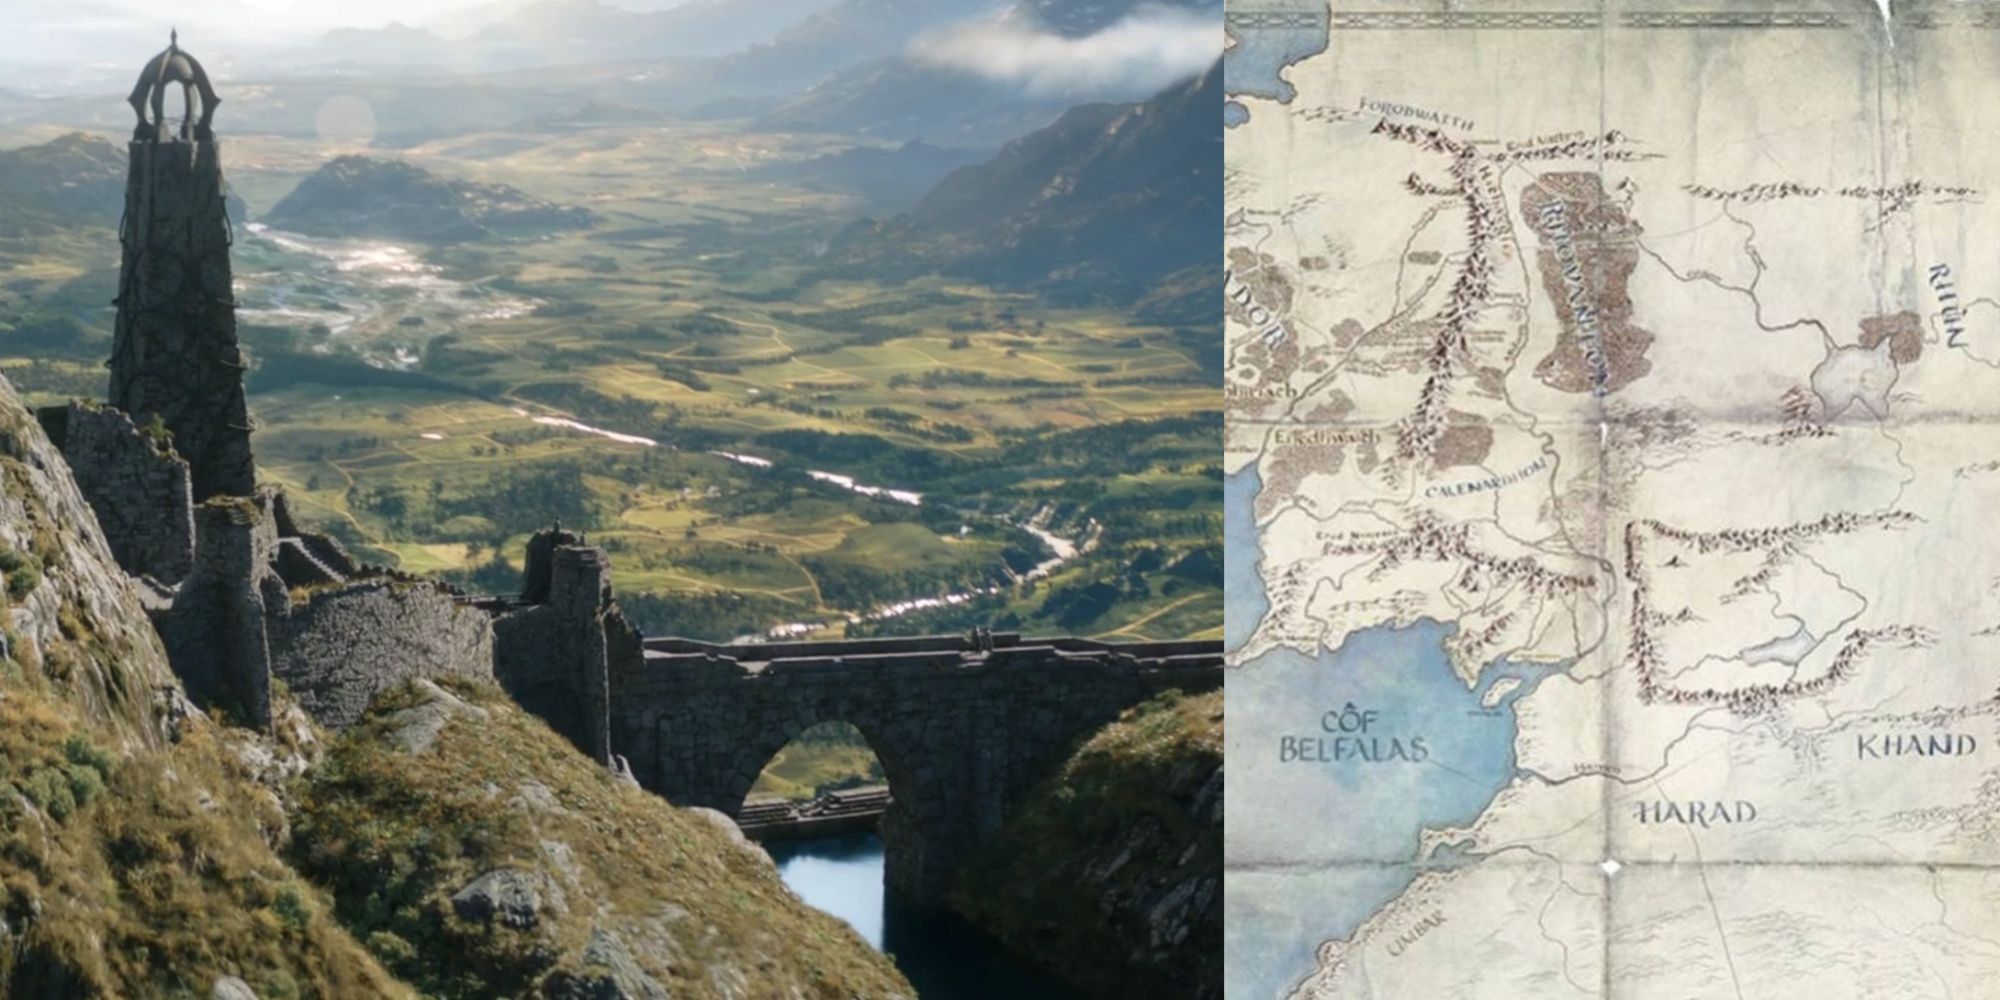 split image southlands and easterlings Tower of Ostirith map of middle-earth LotR Rings of Power